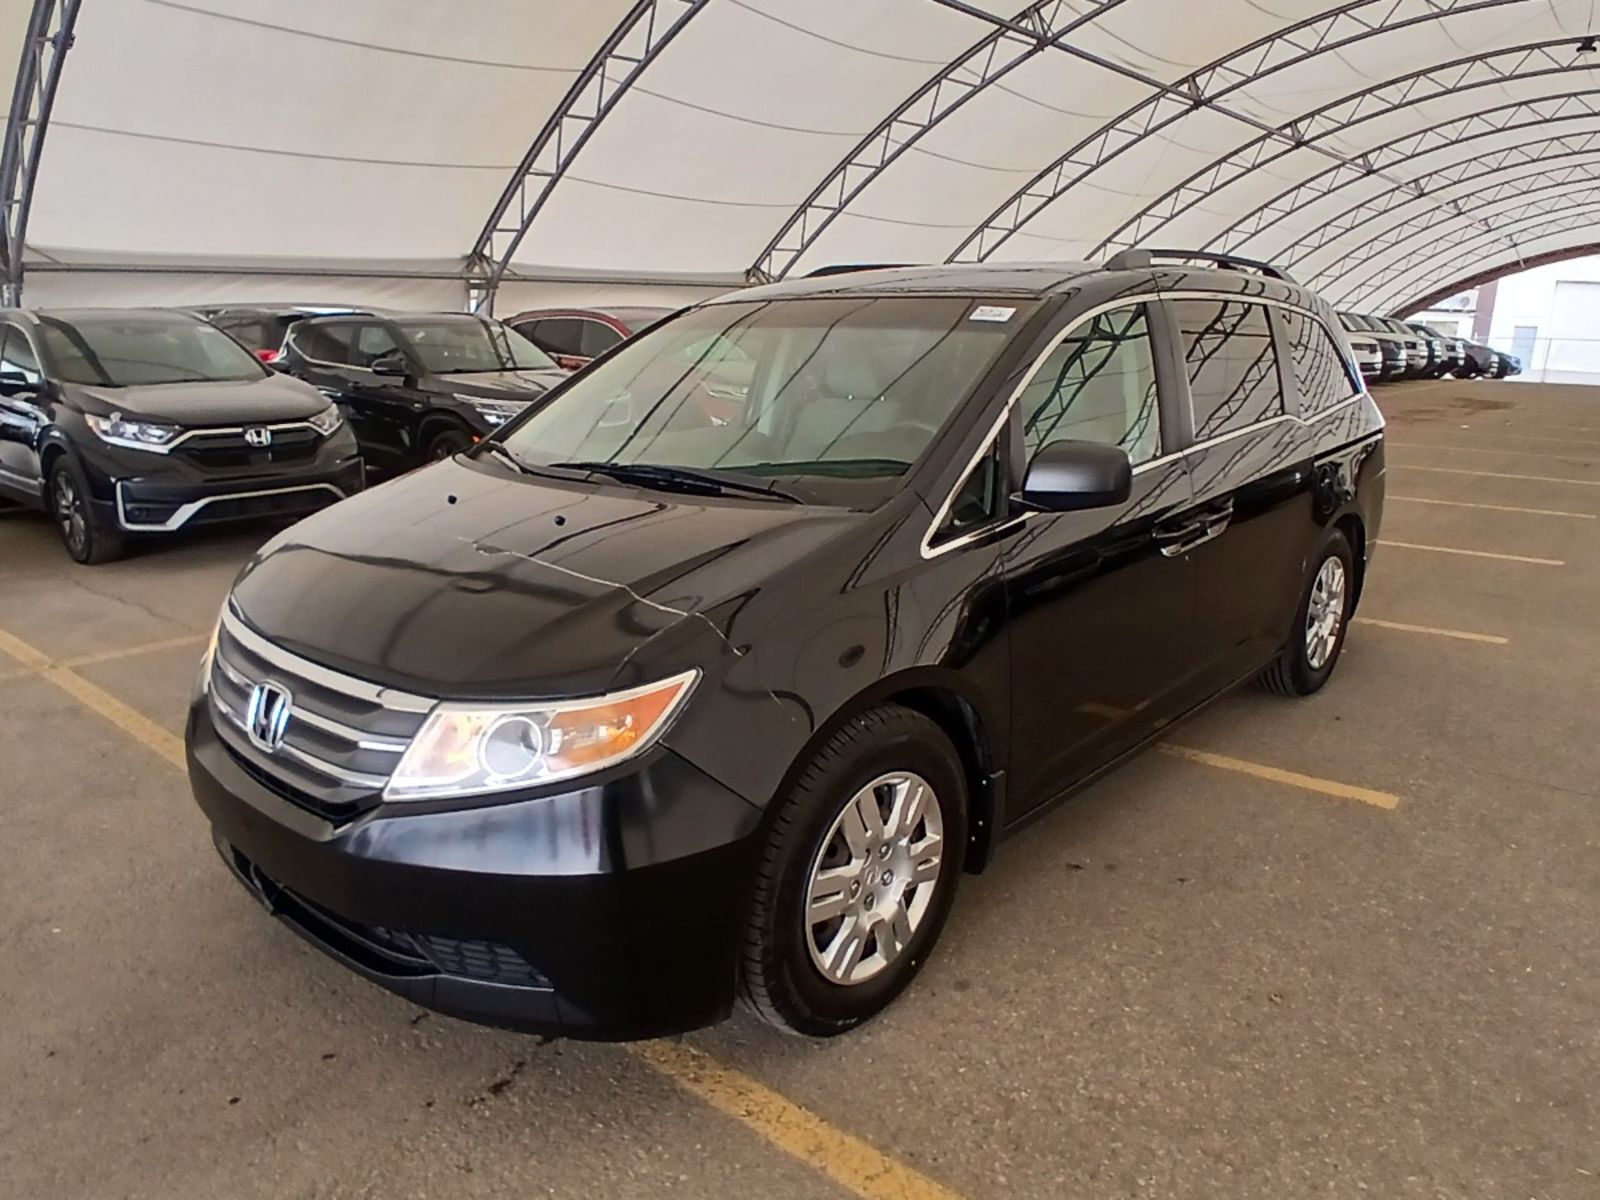 2012 Honda Odyssey LX - No Accidents, One Owner, 3rd Row Seating